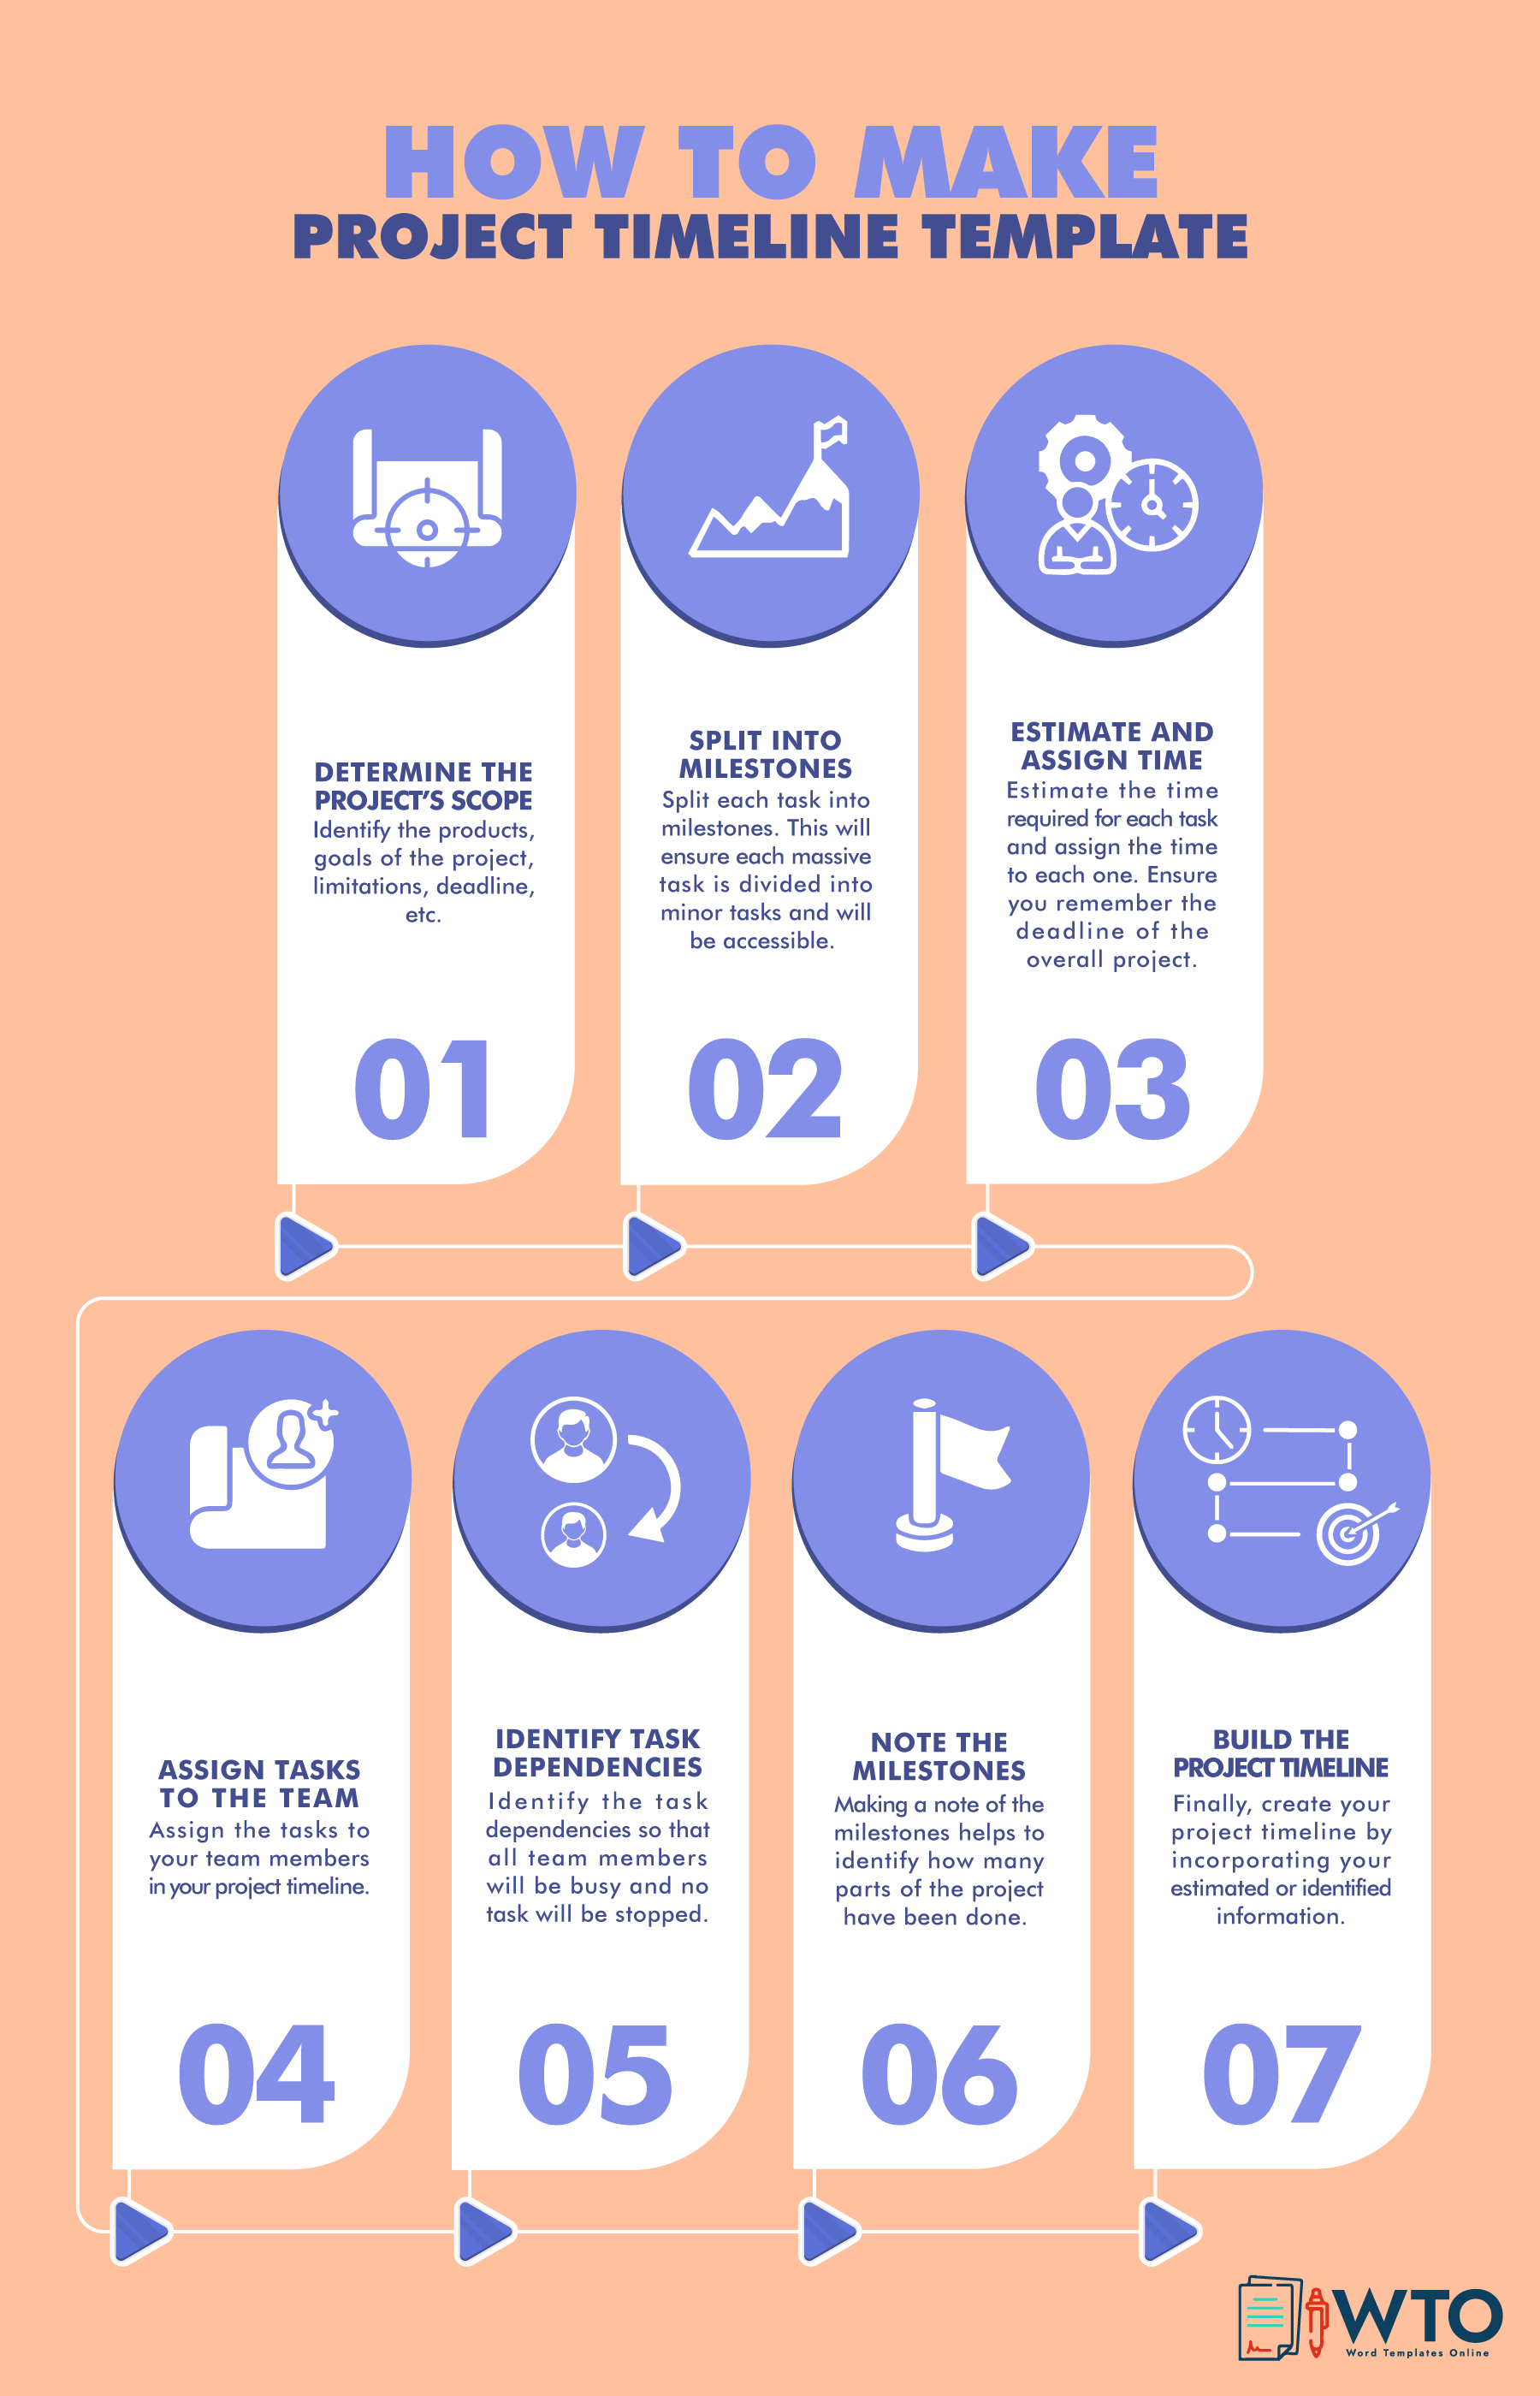 This infographic is about how to make project timeline template.